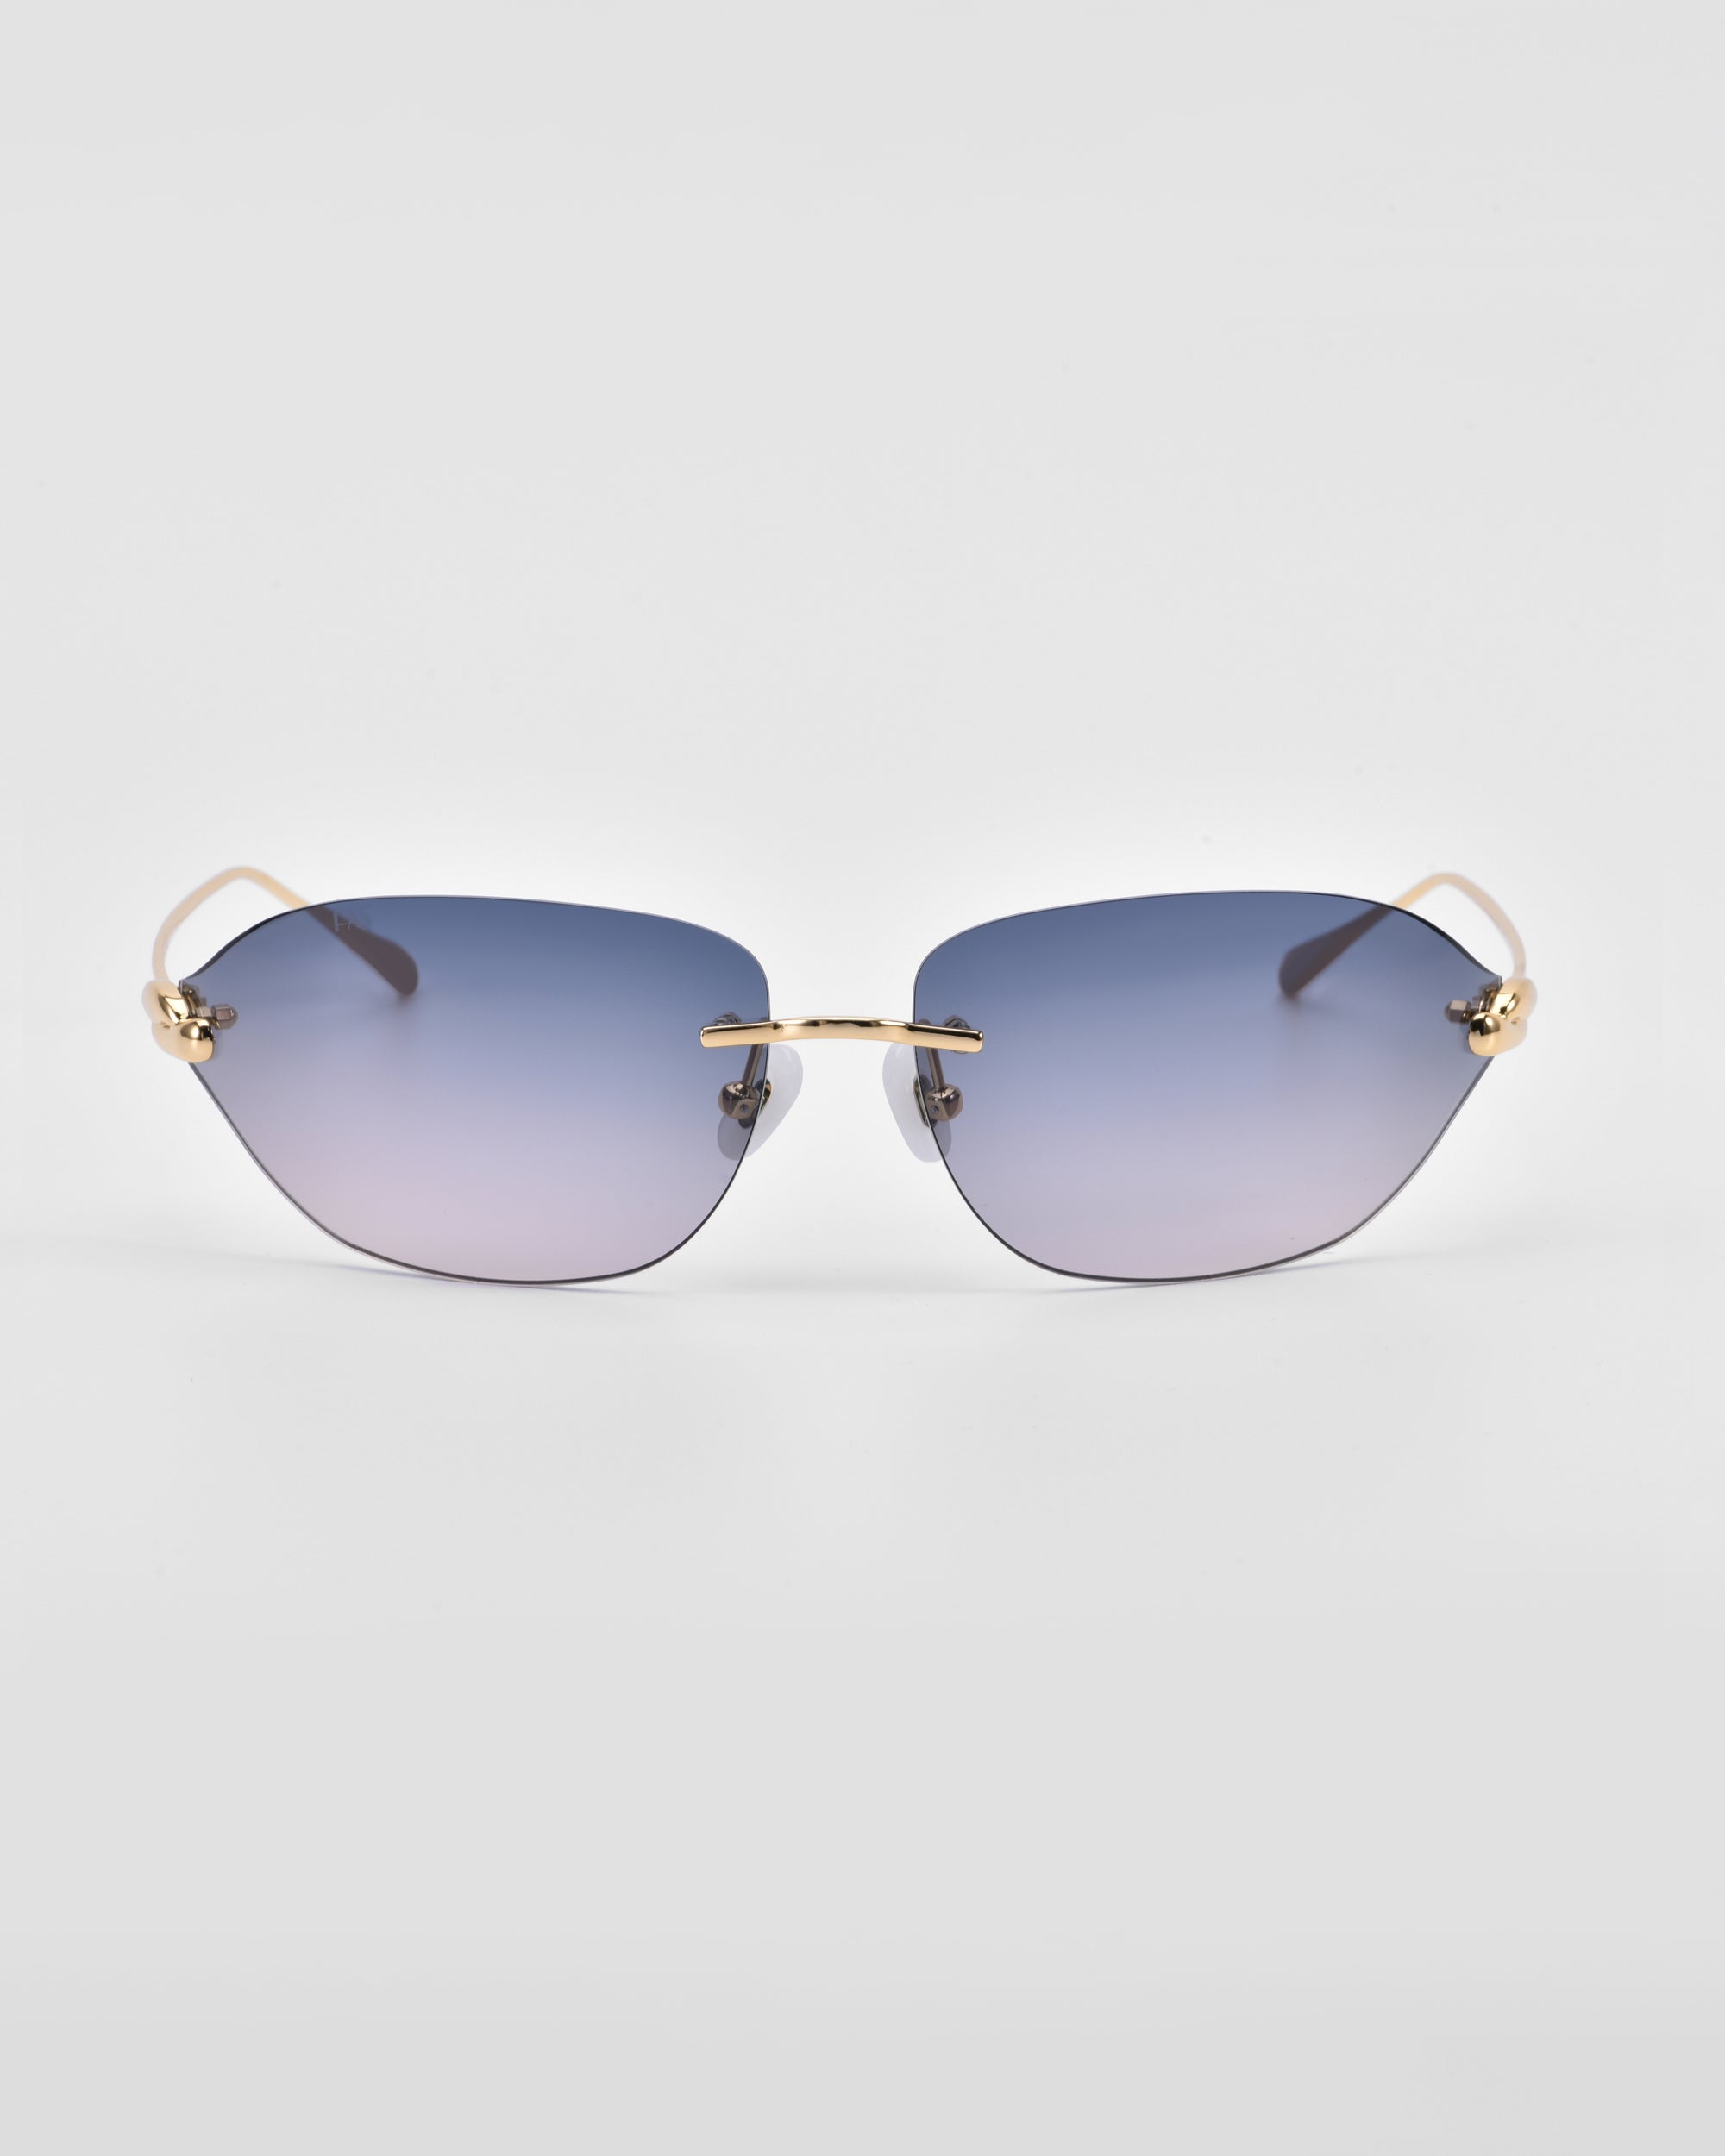 A pair of For Art&#39;s Sake® Serpent I rimless sunglasses with gradient blue-tinted lenses and 18-karat gold-plated arms and bridge. The arms have small decorative elements near the hinges. The background is plain white.